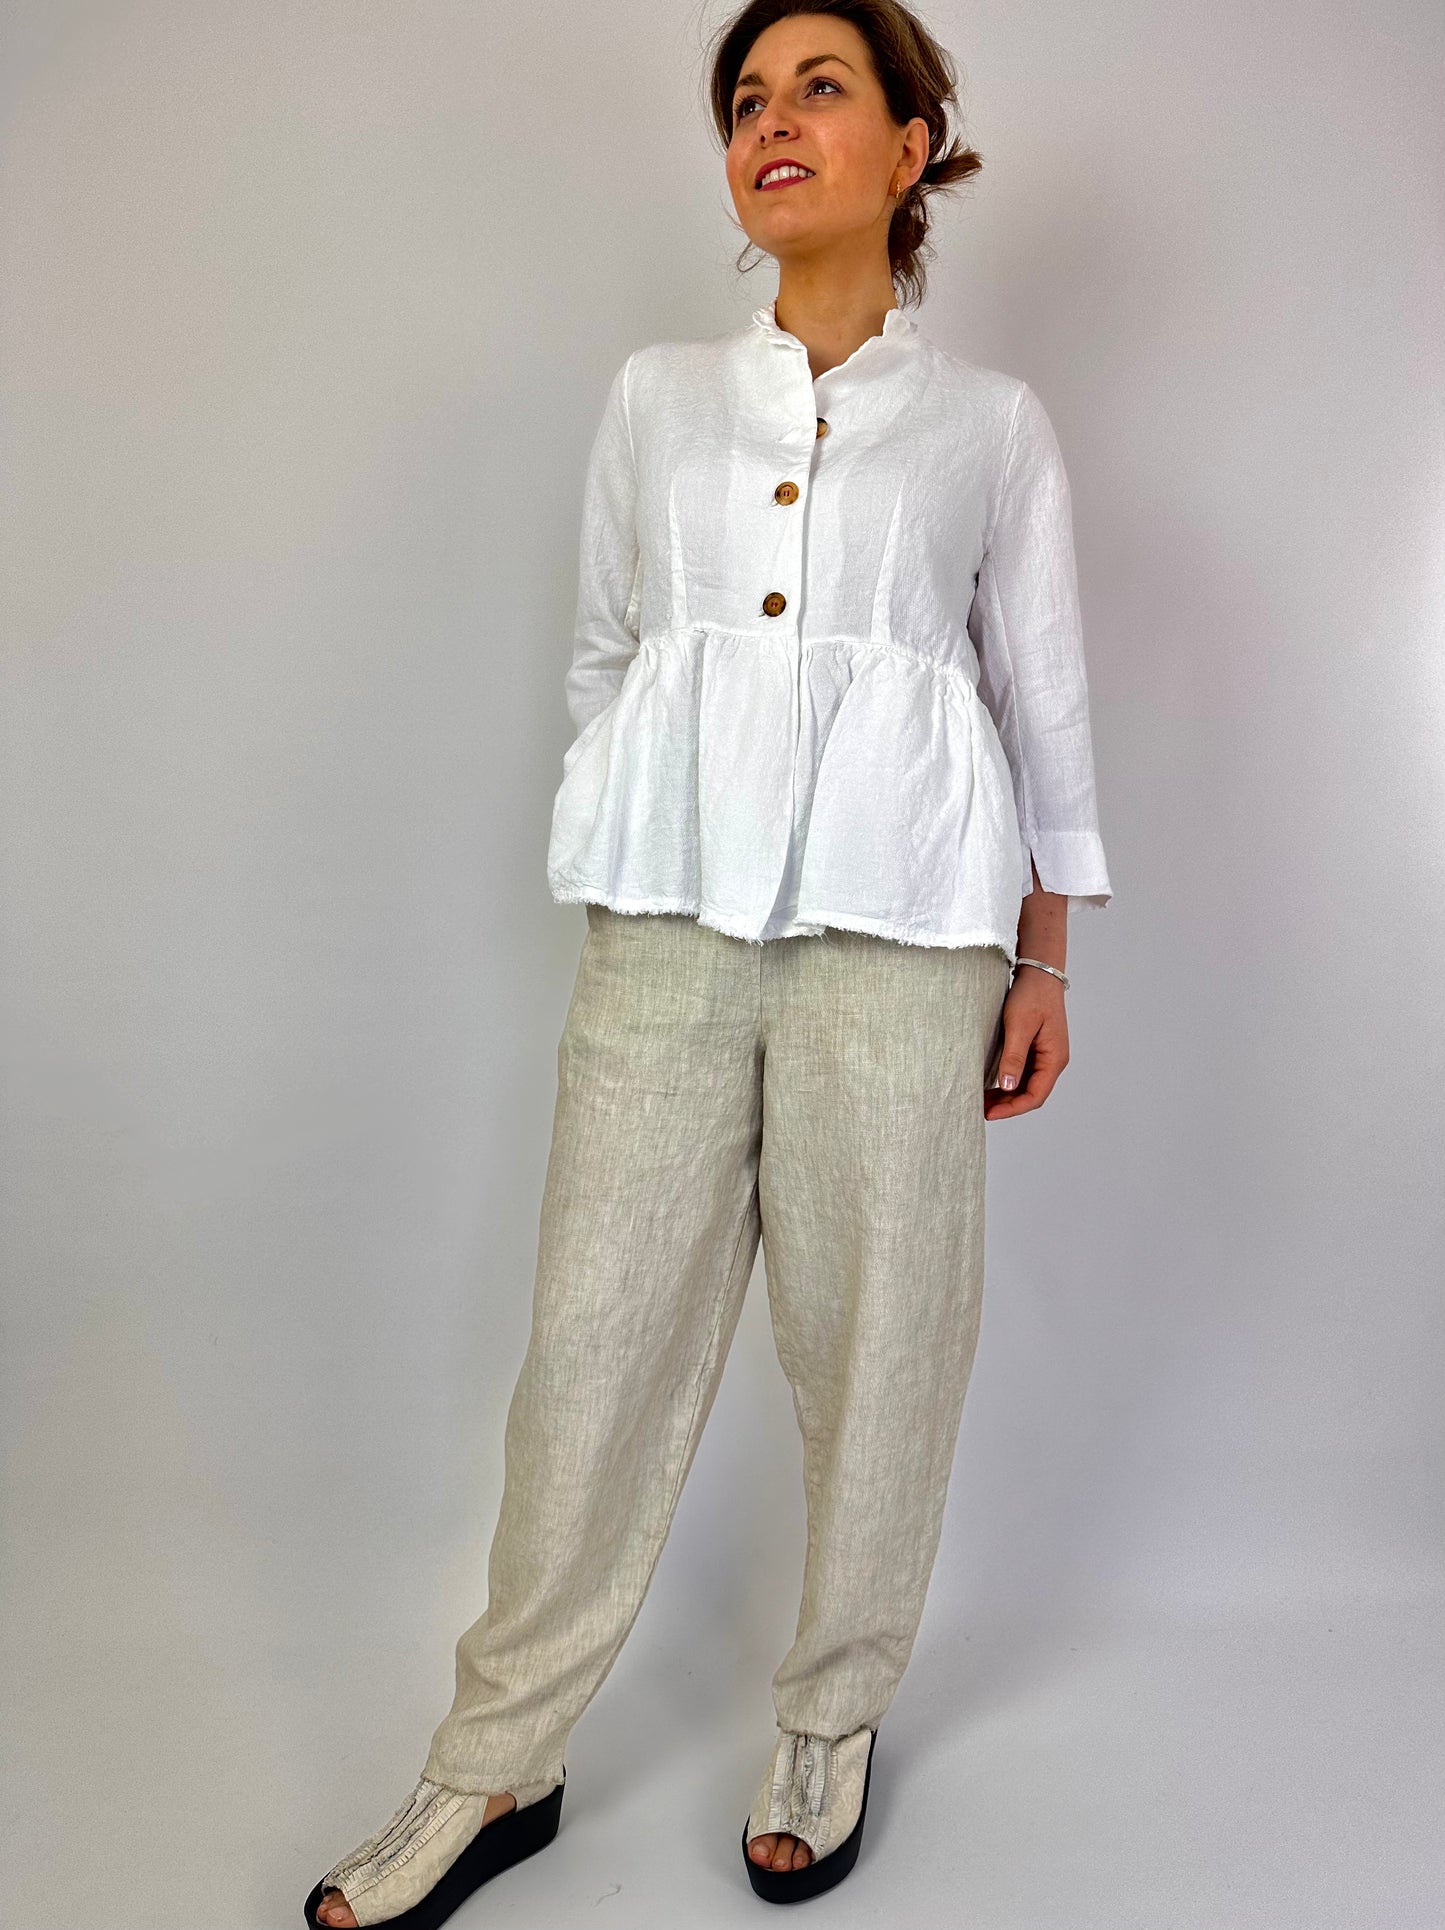 H+ Pedra Trousers Old Sand